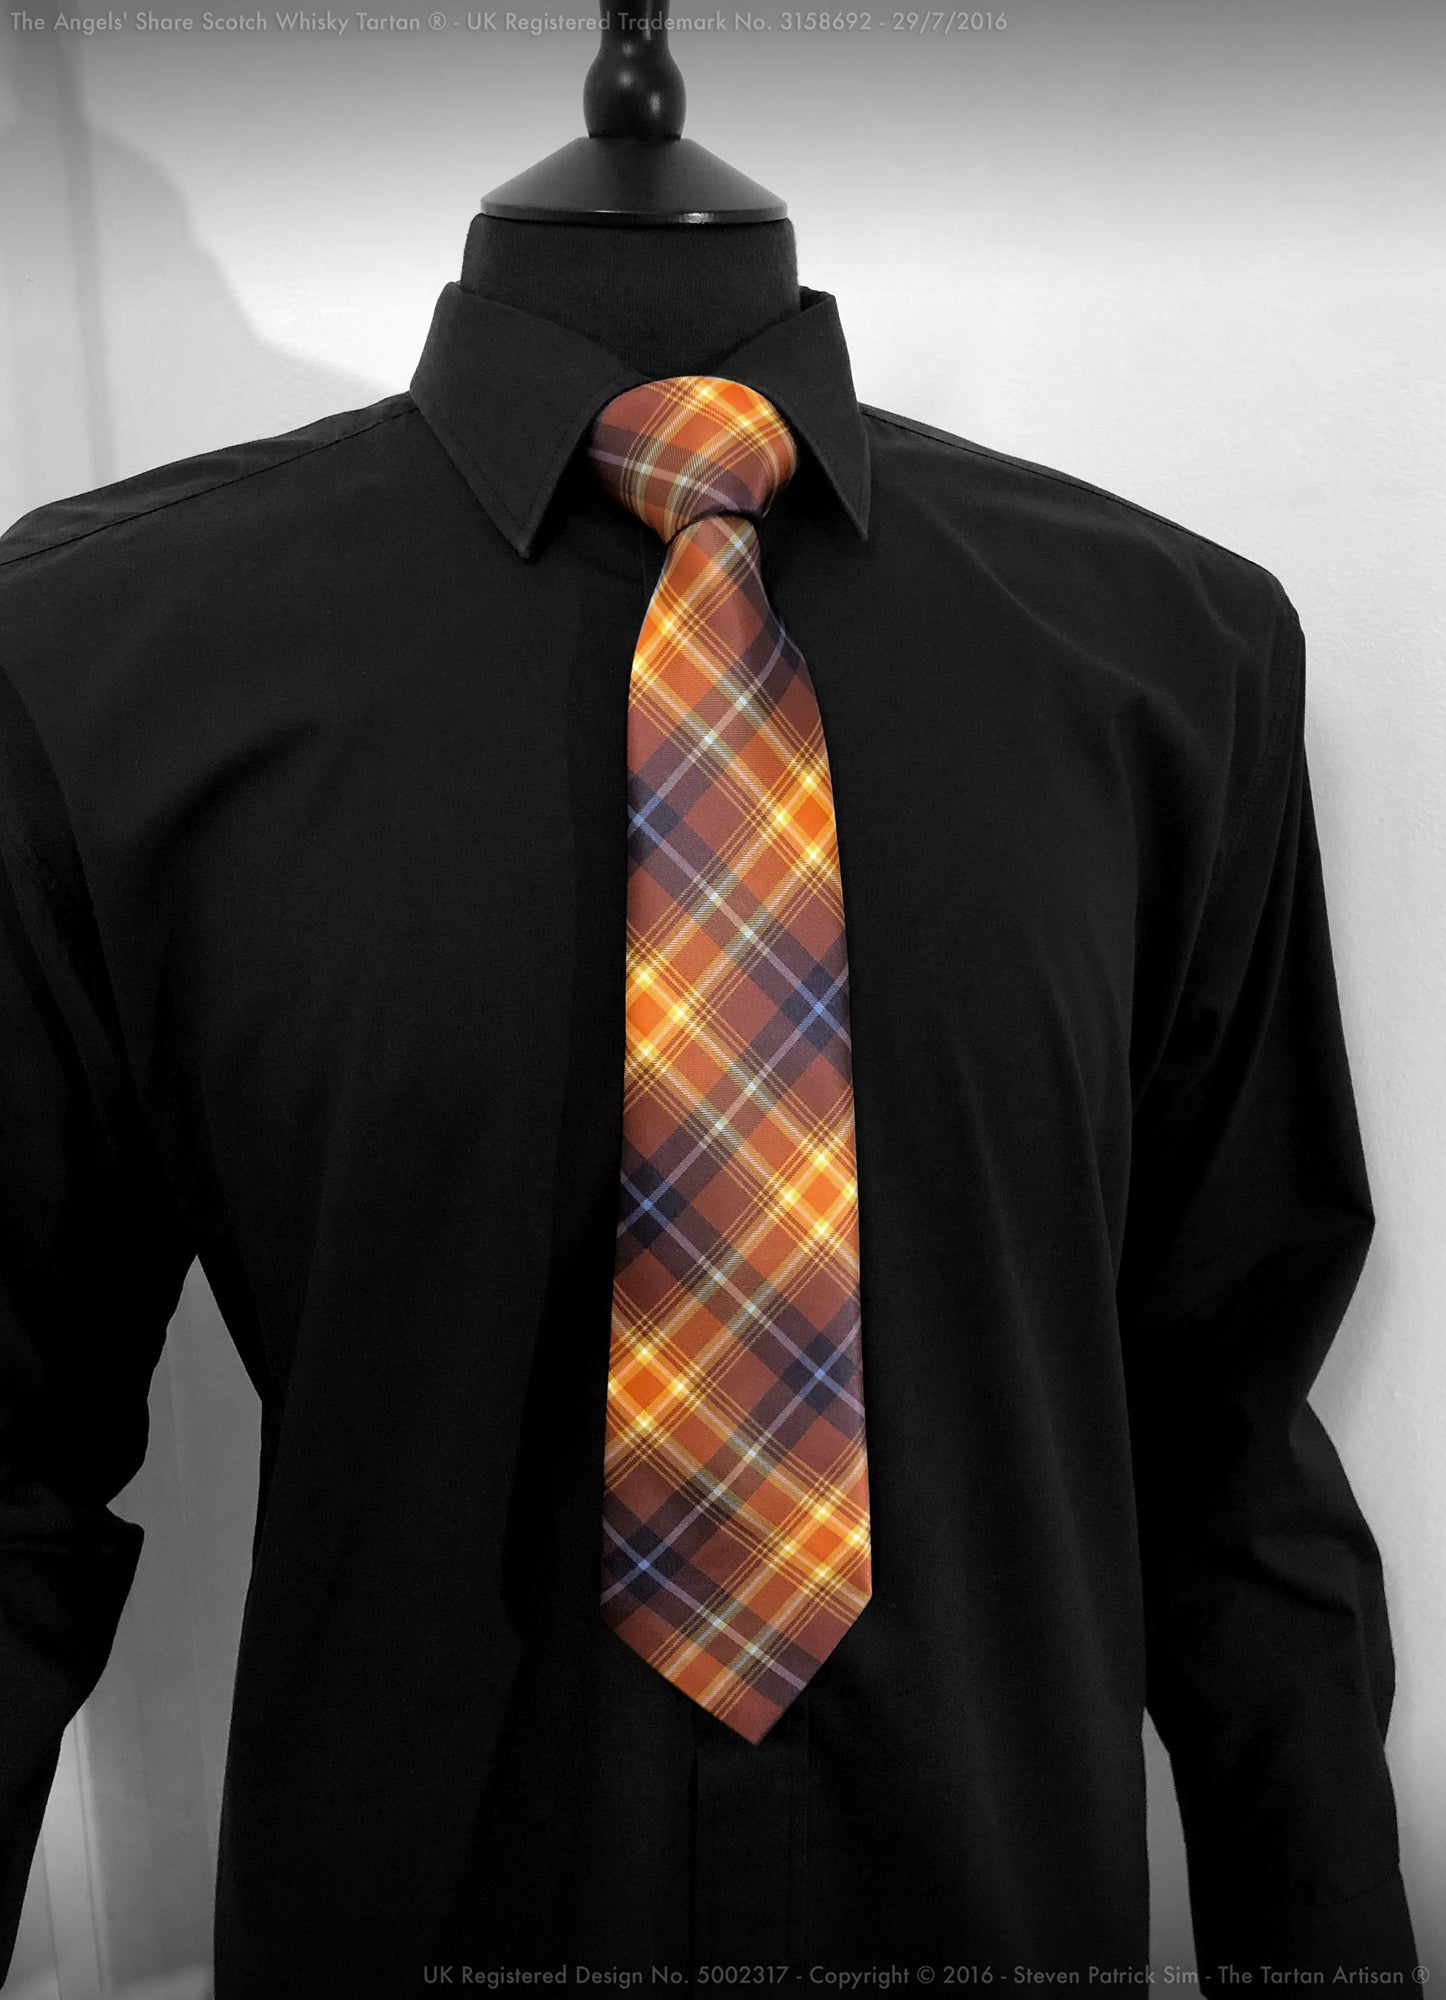 The Angels' Share Scotch Whisky Tartan Gents Neck Tie made in Scotland - an awesome gift idea